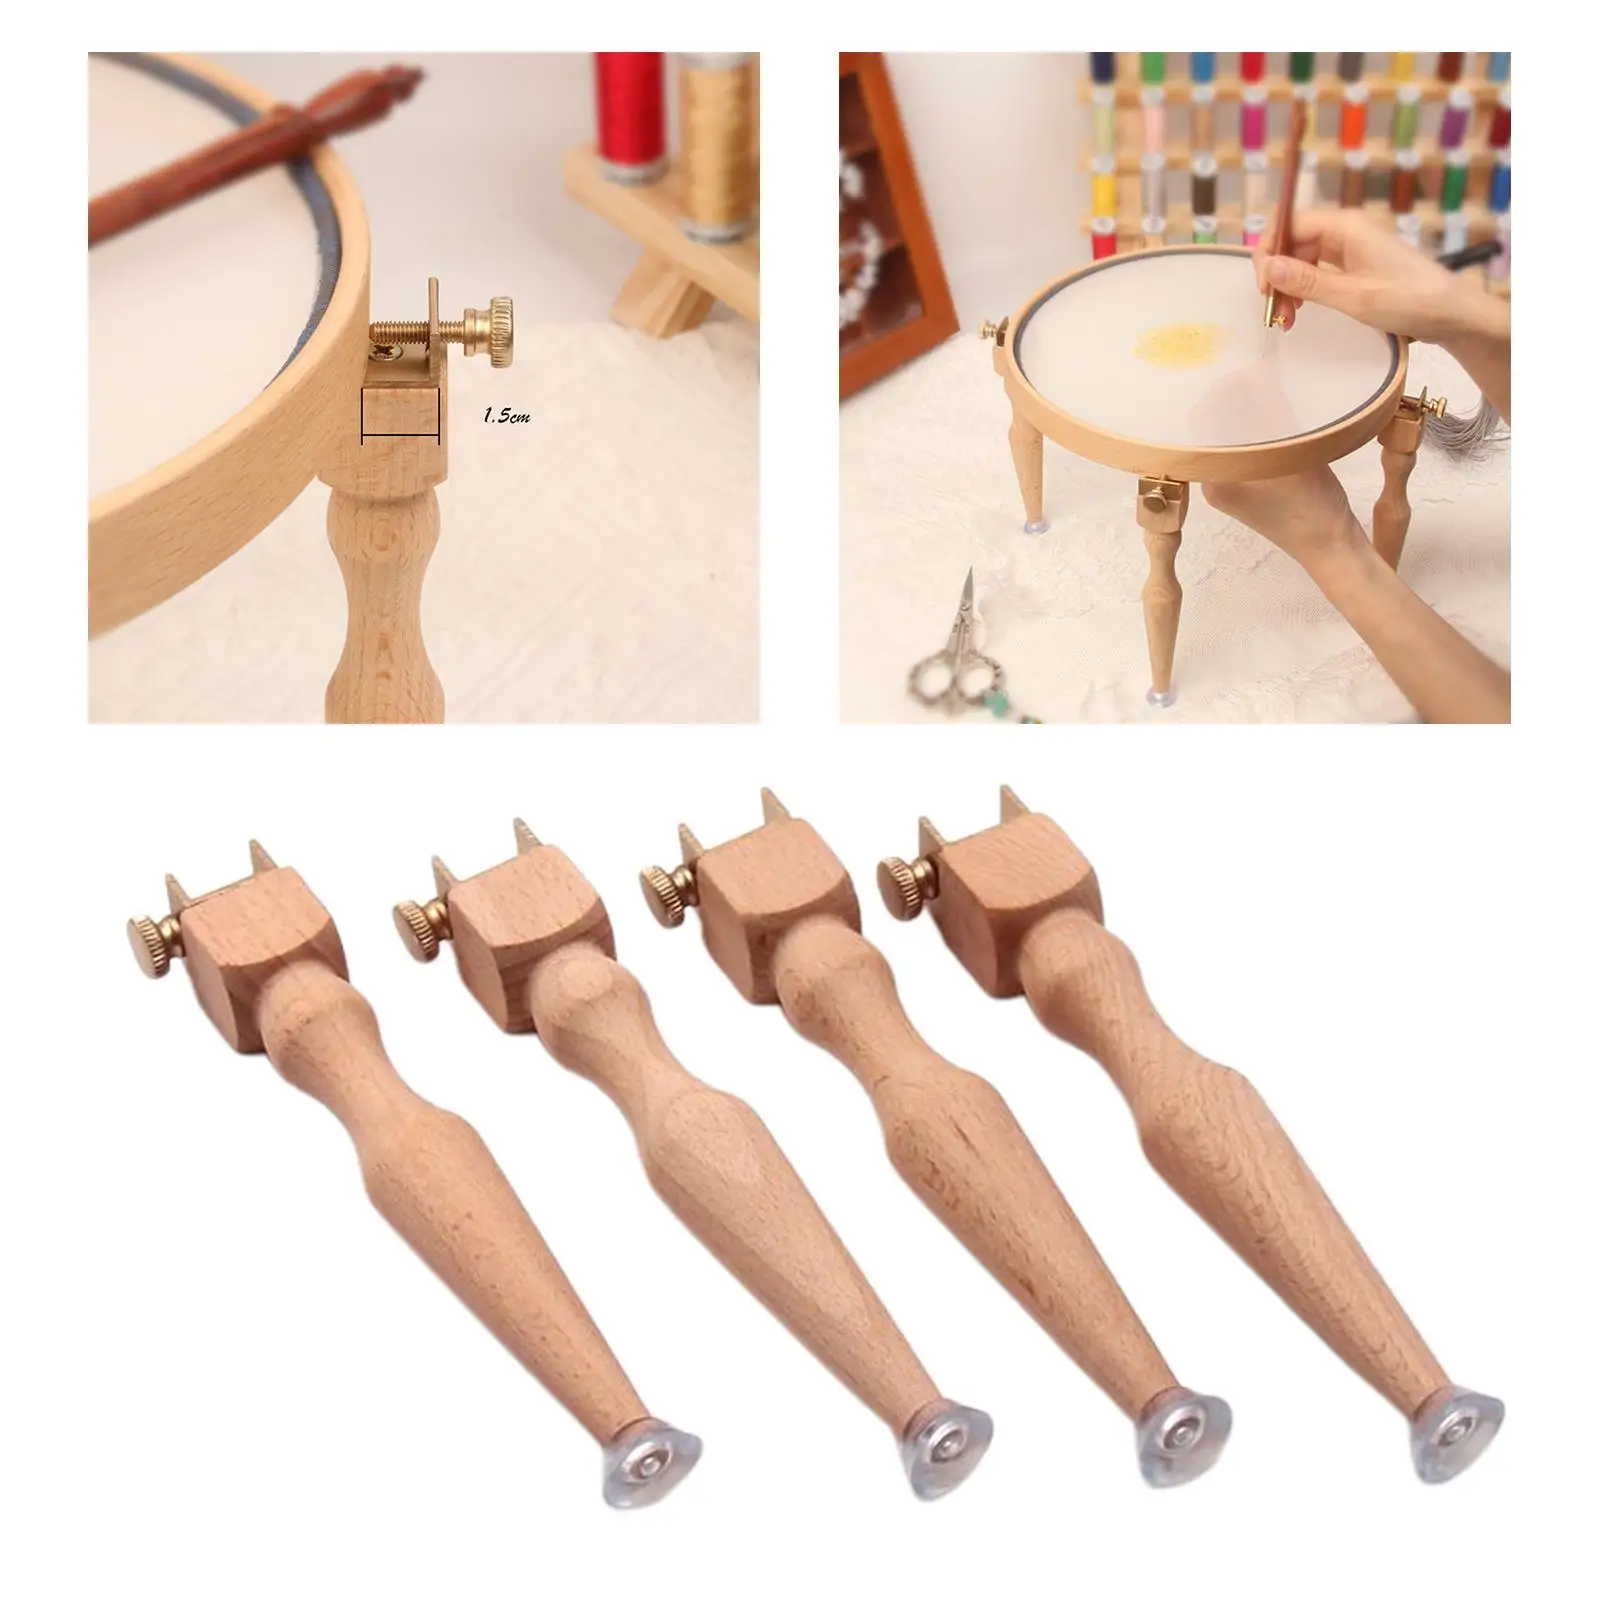 Adjustable Wooden Embroidery Hoop Stand Legs 4Pcs Needlework  Stitch Embroidery  Legs Rack Holder Crafts Supplies Tools